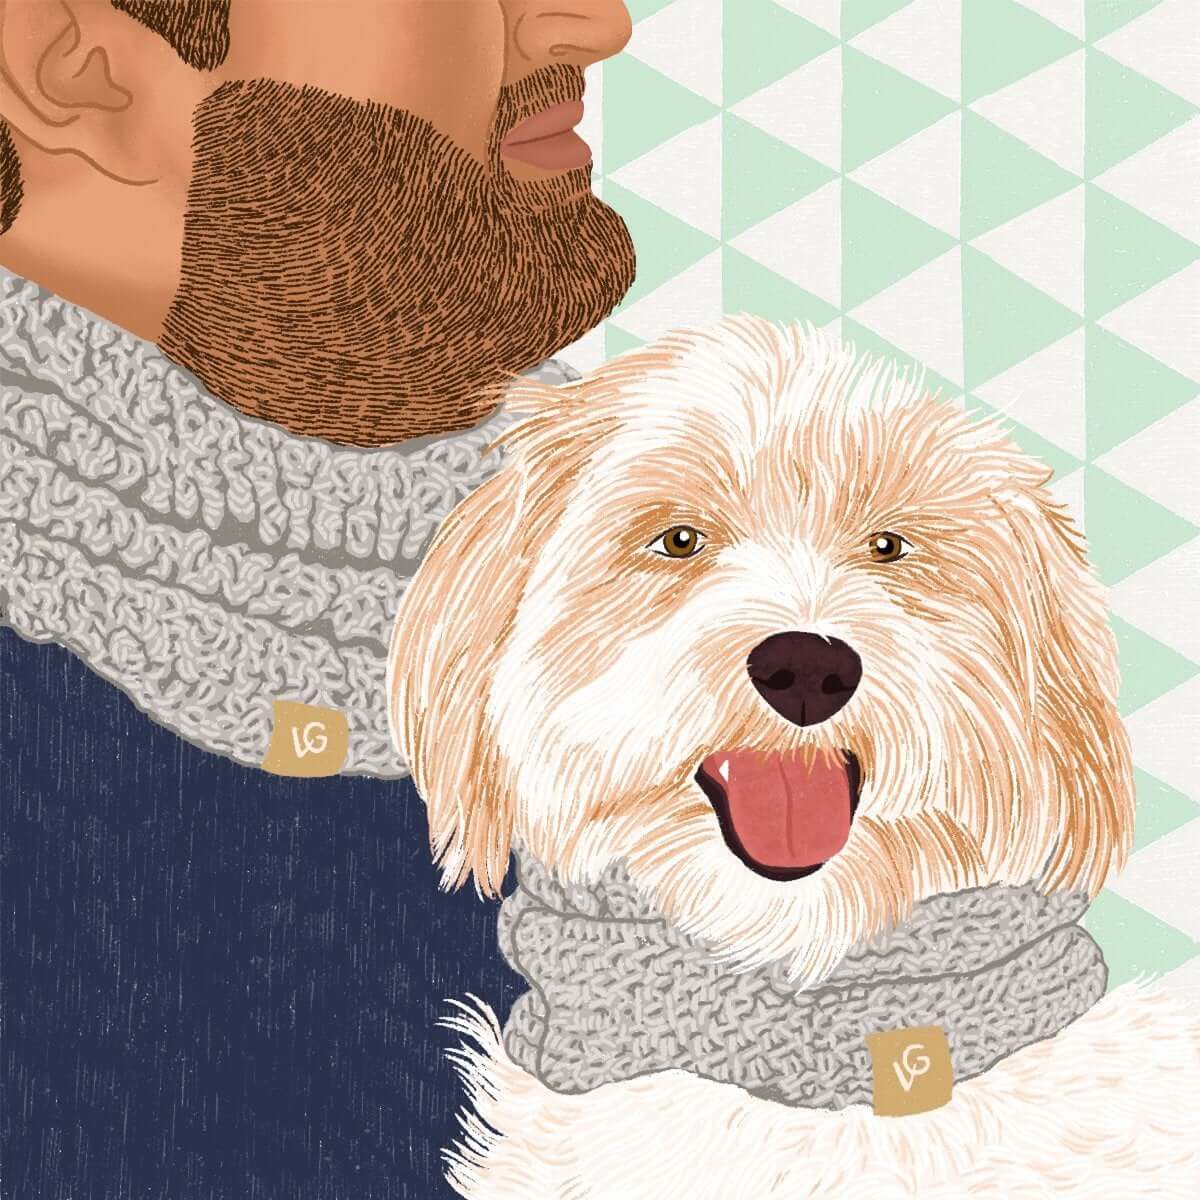 Valgray luxury accessories image of close-up product shot of Valgray luxury dog and owner handcrafted snoods on a small dog and male human. The product in the image is the Valgray pepper (grey) snood on a small-sized dog and person.